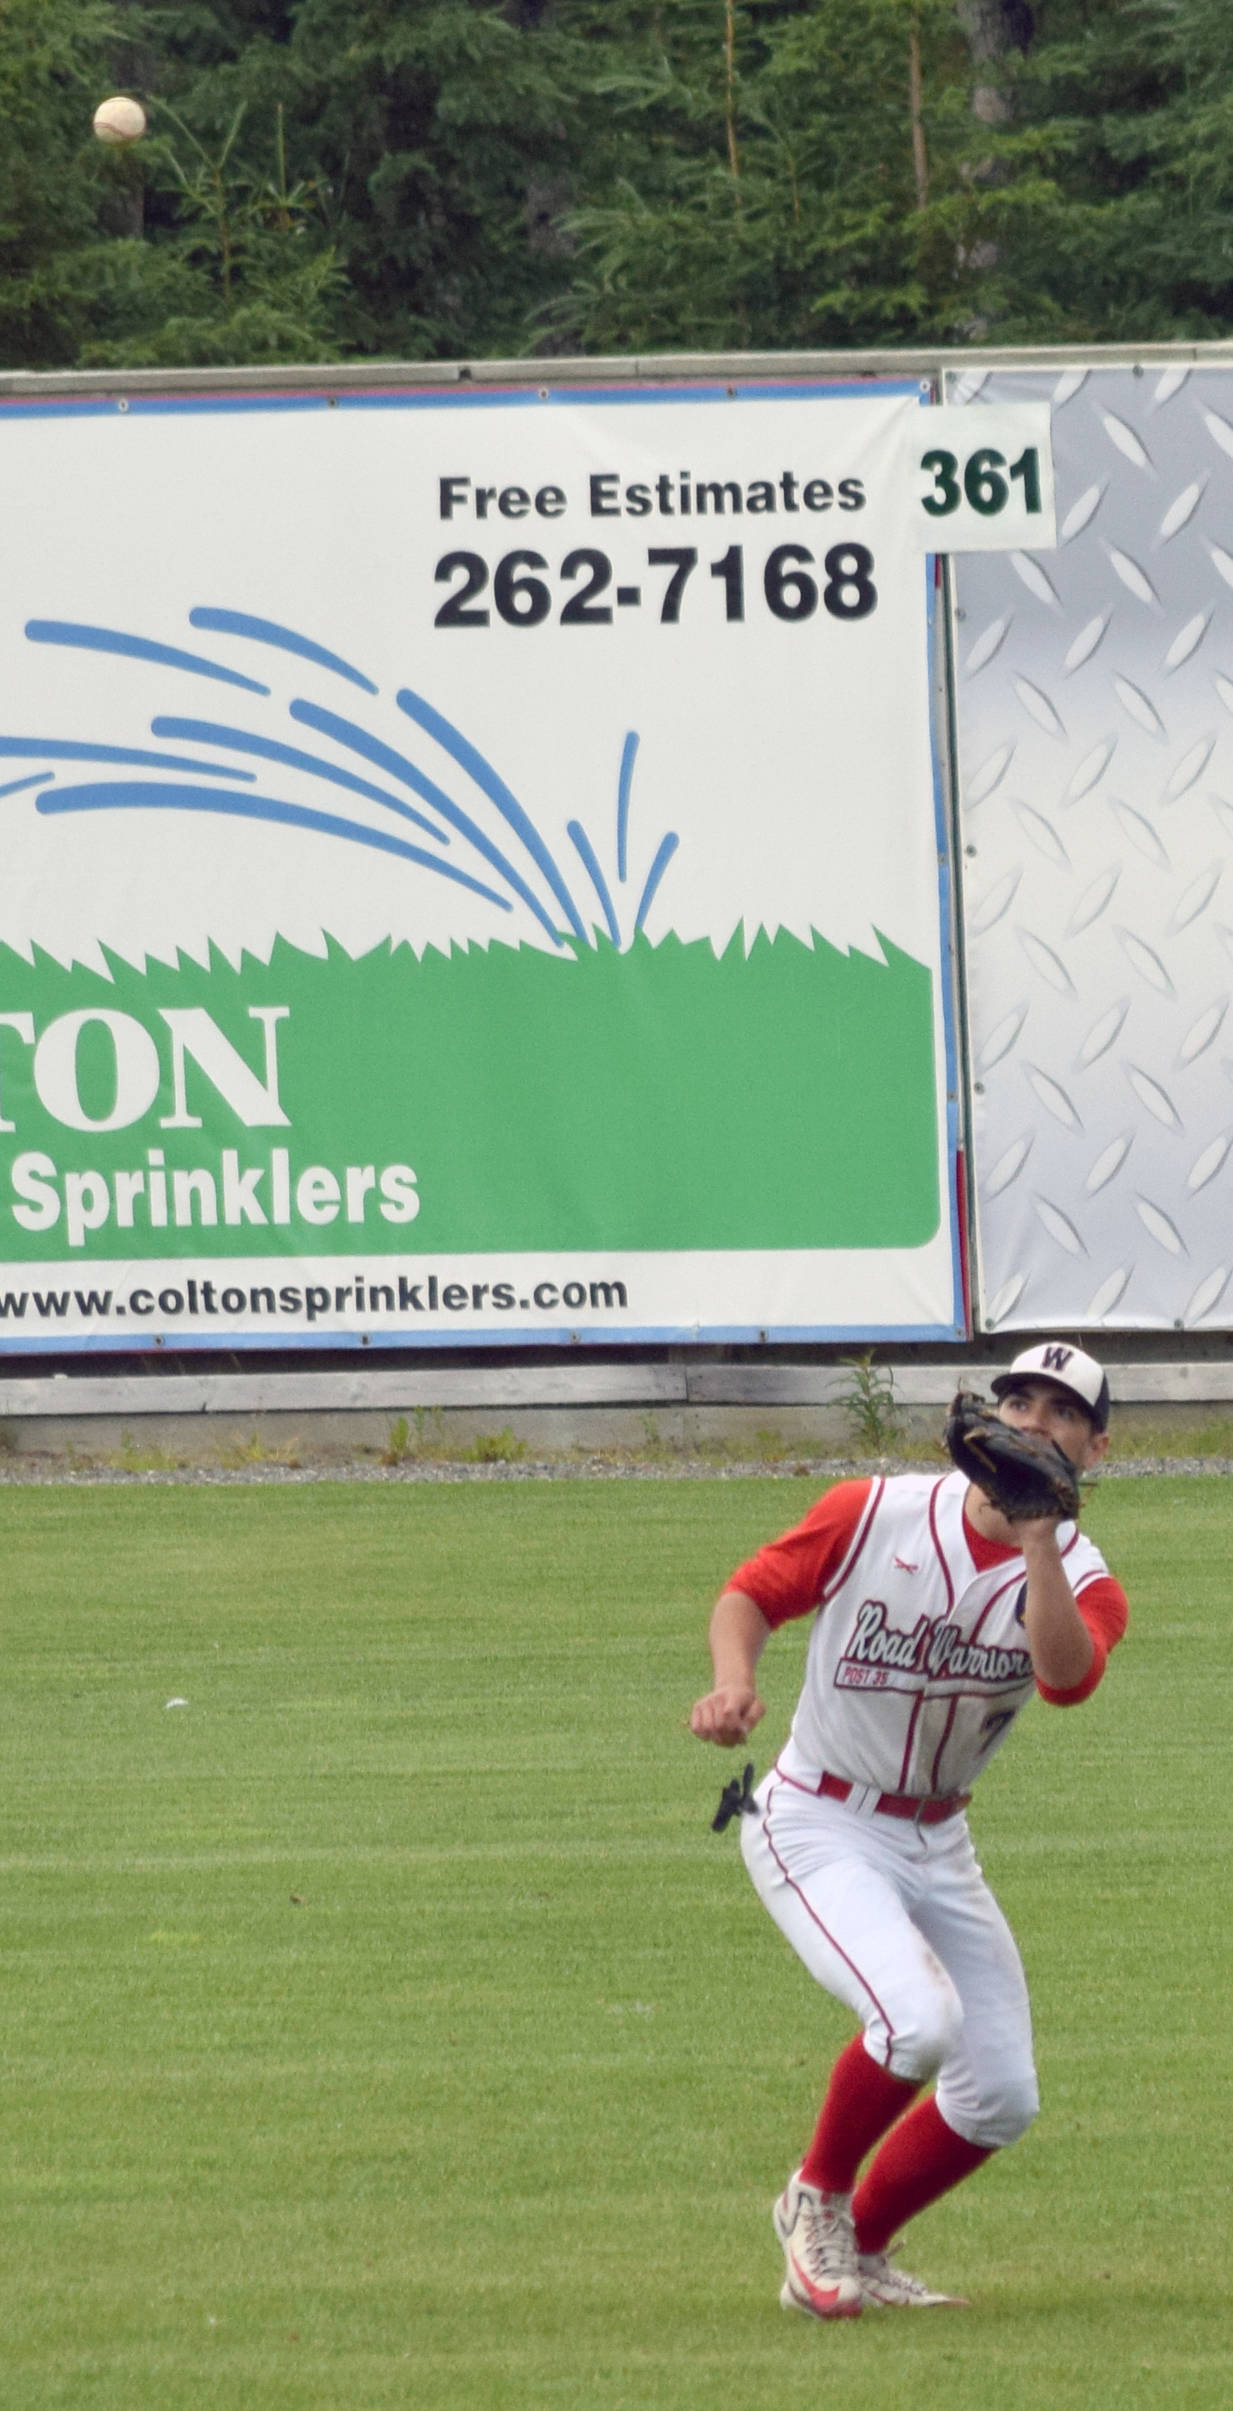 Wasilla Road Warriors right fielder Sam Reed prepares to haul in a fly from Mose Hayes of the Twins in the fourth inning of the first game of a doubleheader at Coral Seymour Memorial Park in Kenai on Sunday, July 16, 2017. (Photo by Jeff Helminiak/Peninsula Clarion)